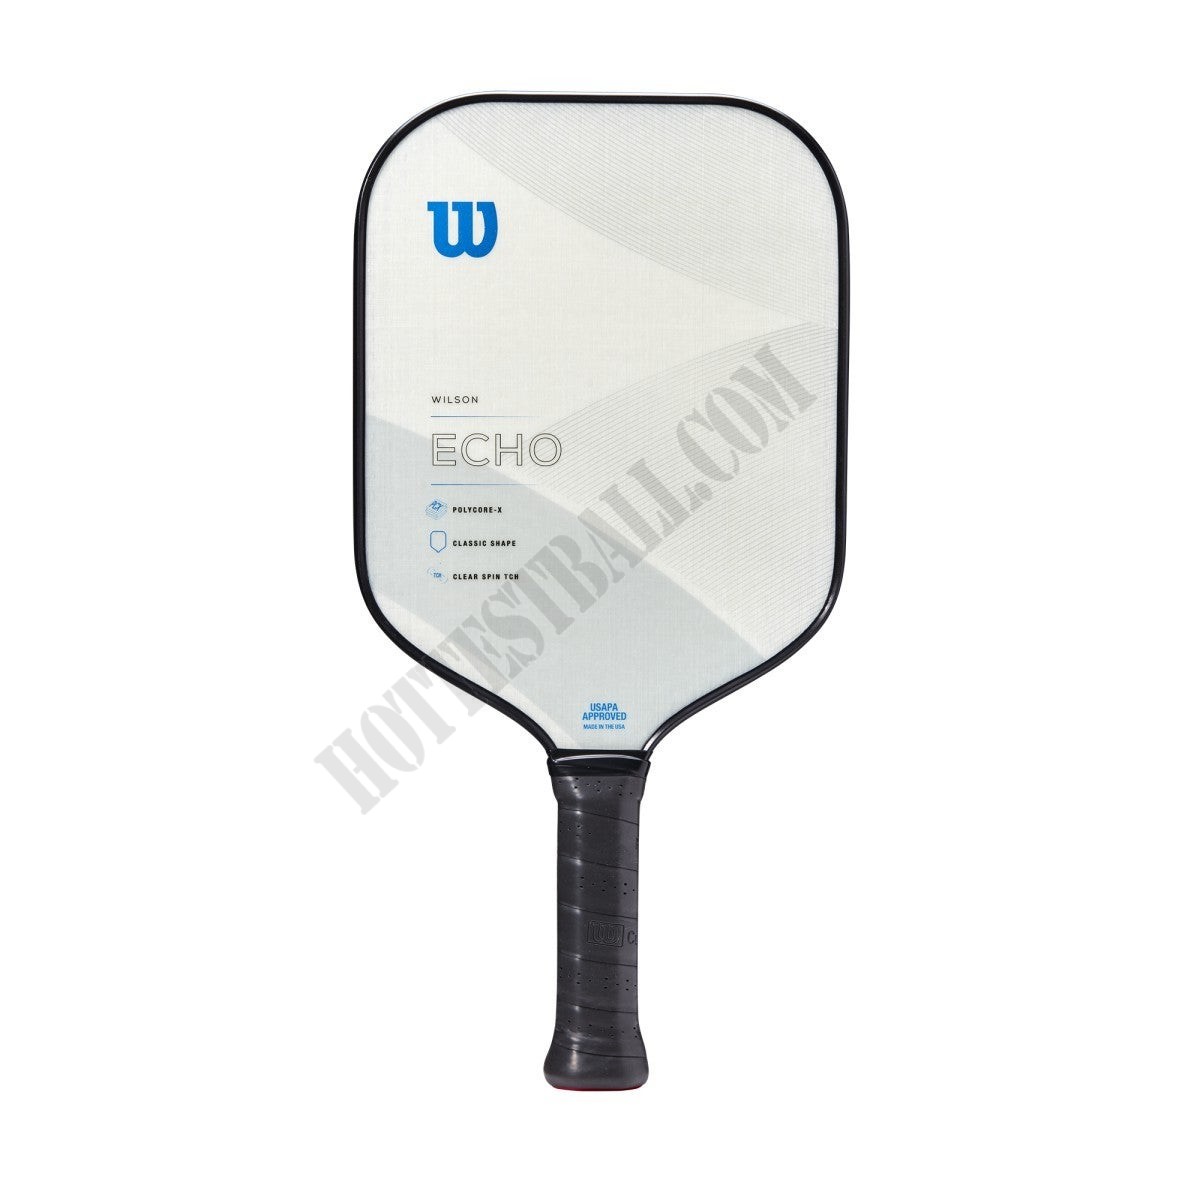 Echo Pickleball Paddle - Wilson Discount Store - Echo Pickleball Paddle - Wilson Discount Store